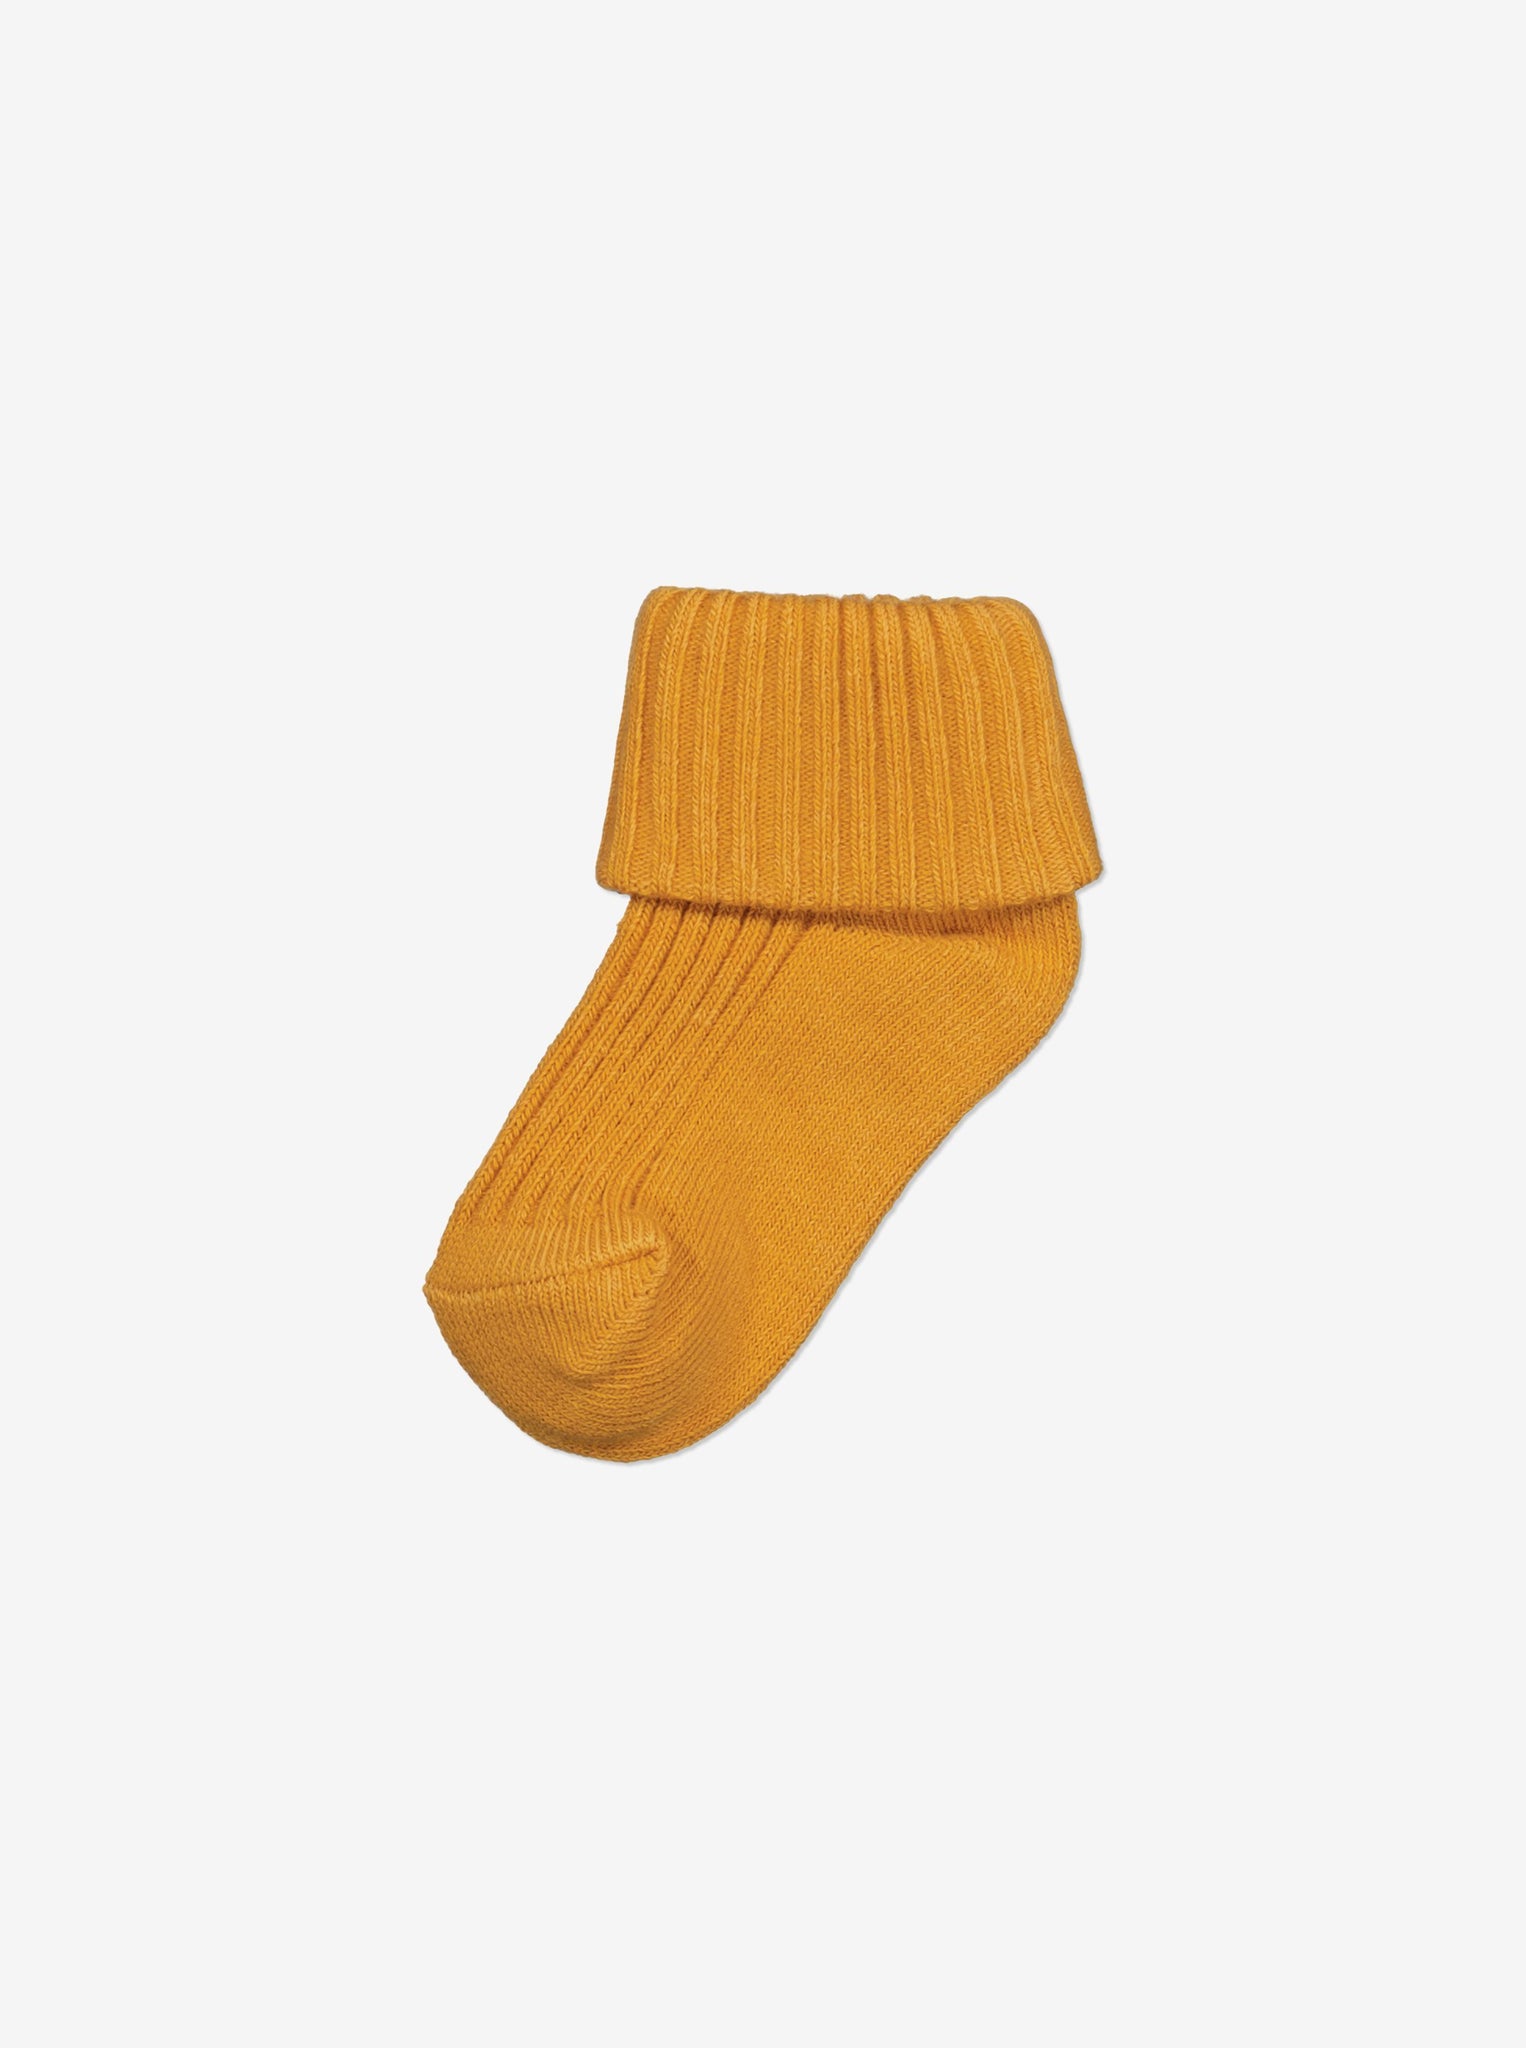  Organic Cotton Yellow Baby Socks from Polarn O. Pyret Kidswear. Made from sustainable materials.